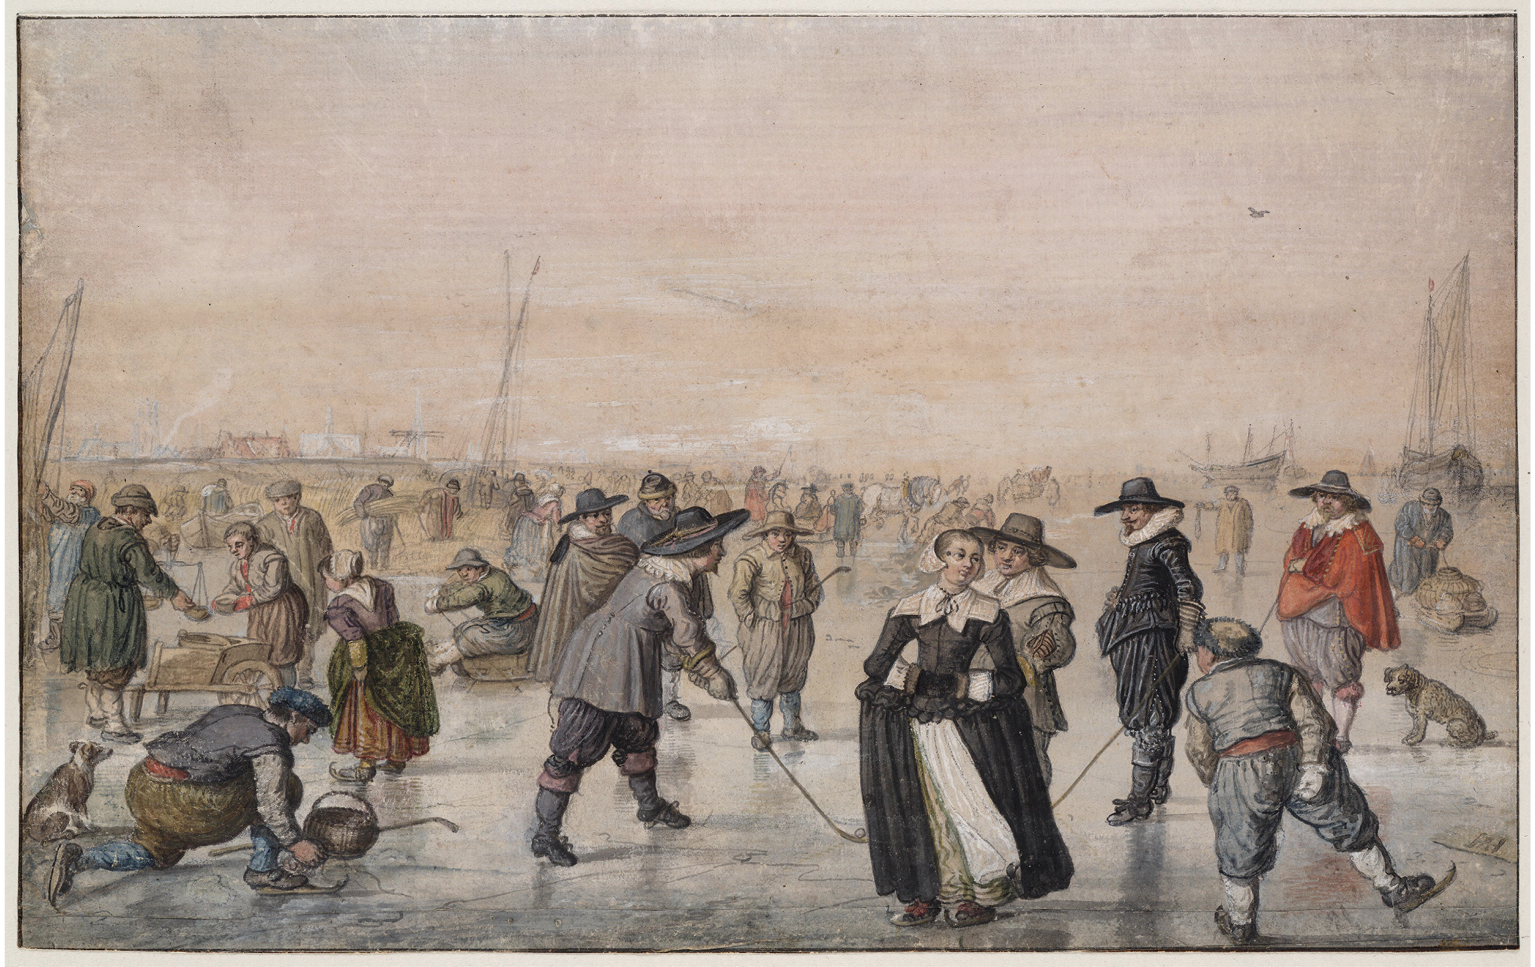 An oil painting from the first half of the 17th century: depicts many people from different social classes intermingling on the frozen waters of a river; on the left, a man leans down to pick something up; at the center, a well-dressed woman stands in skates, while two men play a type of hockey behind her; in the background, people exchange goods and sleds transport people and commercial goods over the frozen waterway.